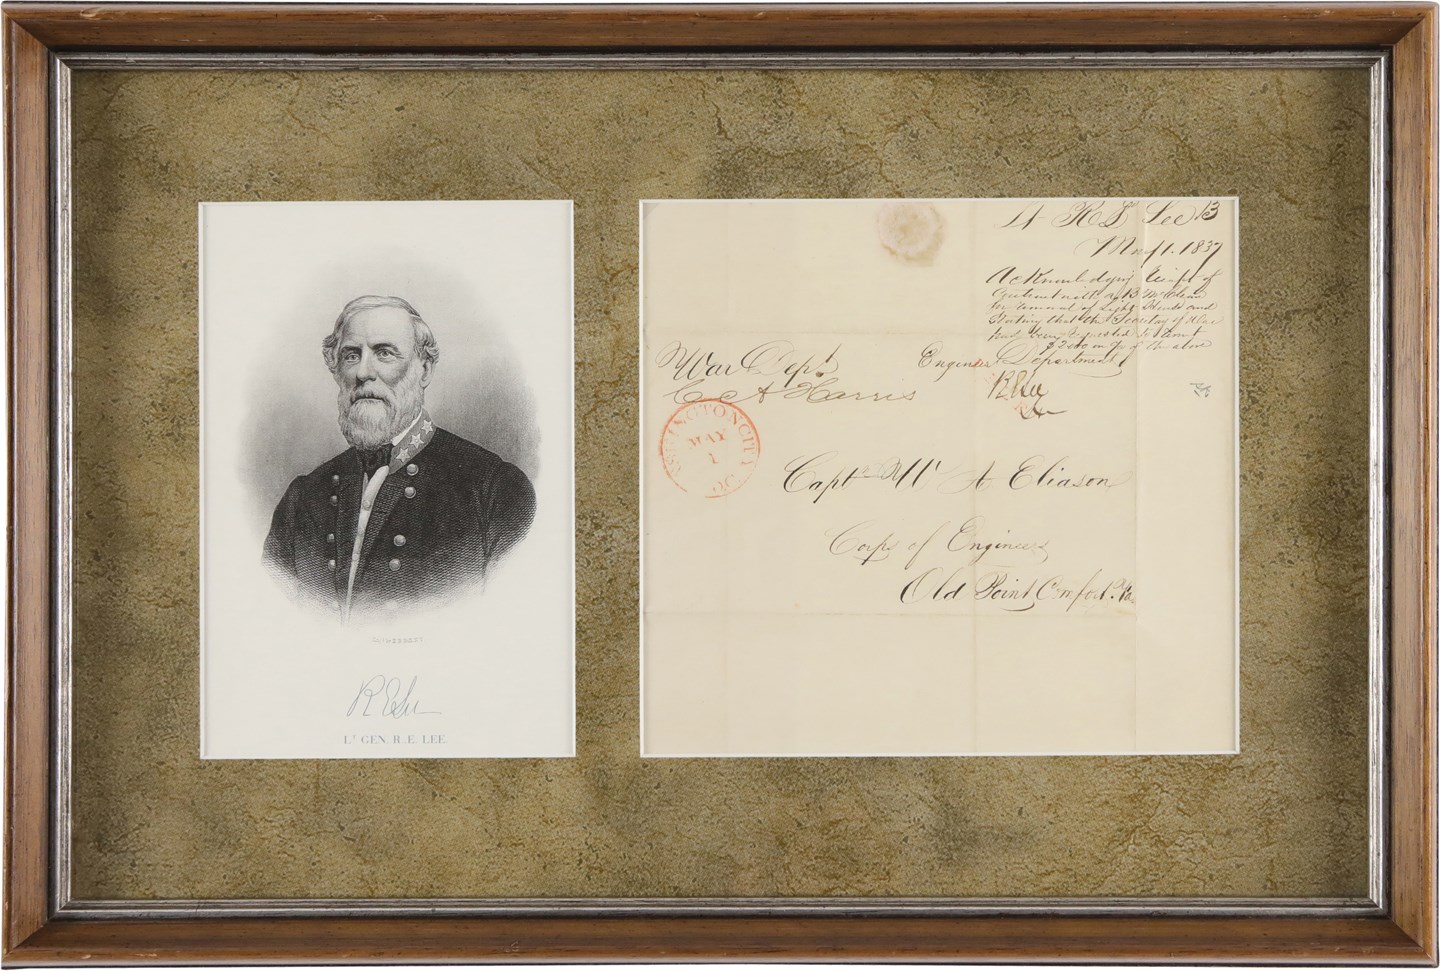 Historical Autographs - 1837 Robert E. Lee Signed and Hand Addressed Free Frank Envelope to Army Captain (PSA)